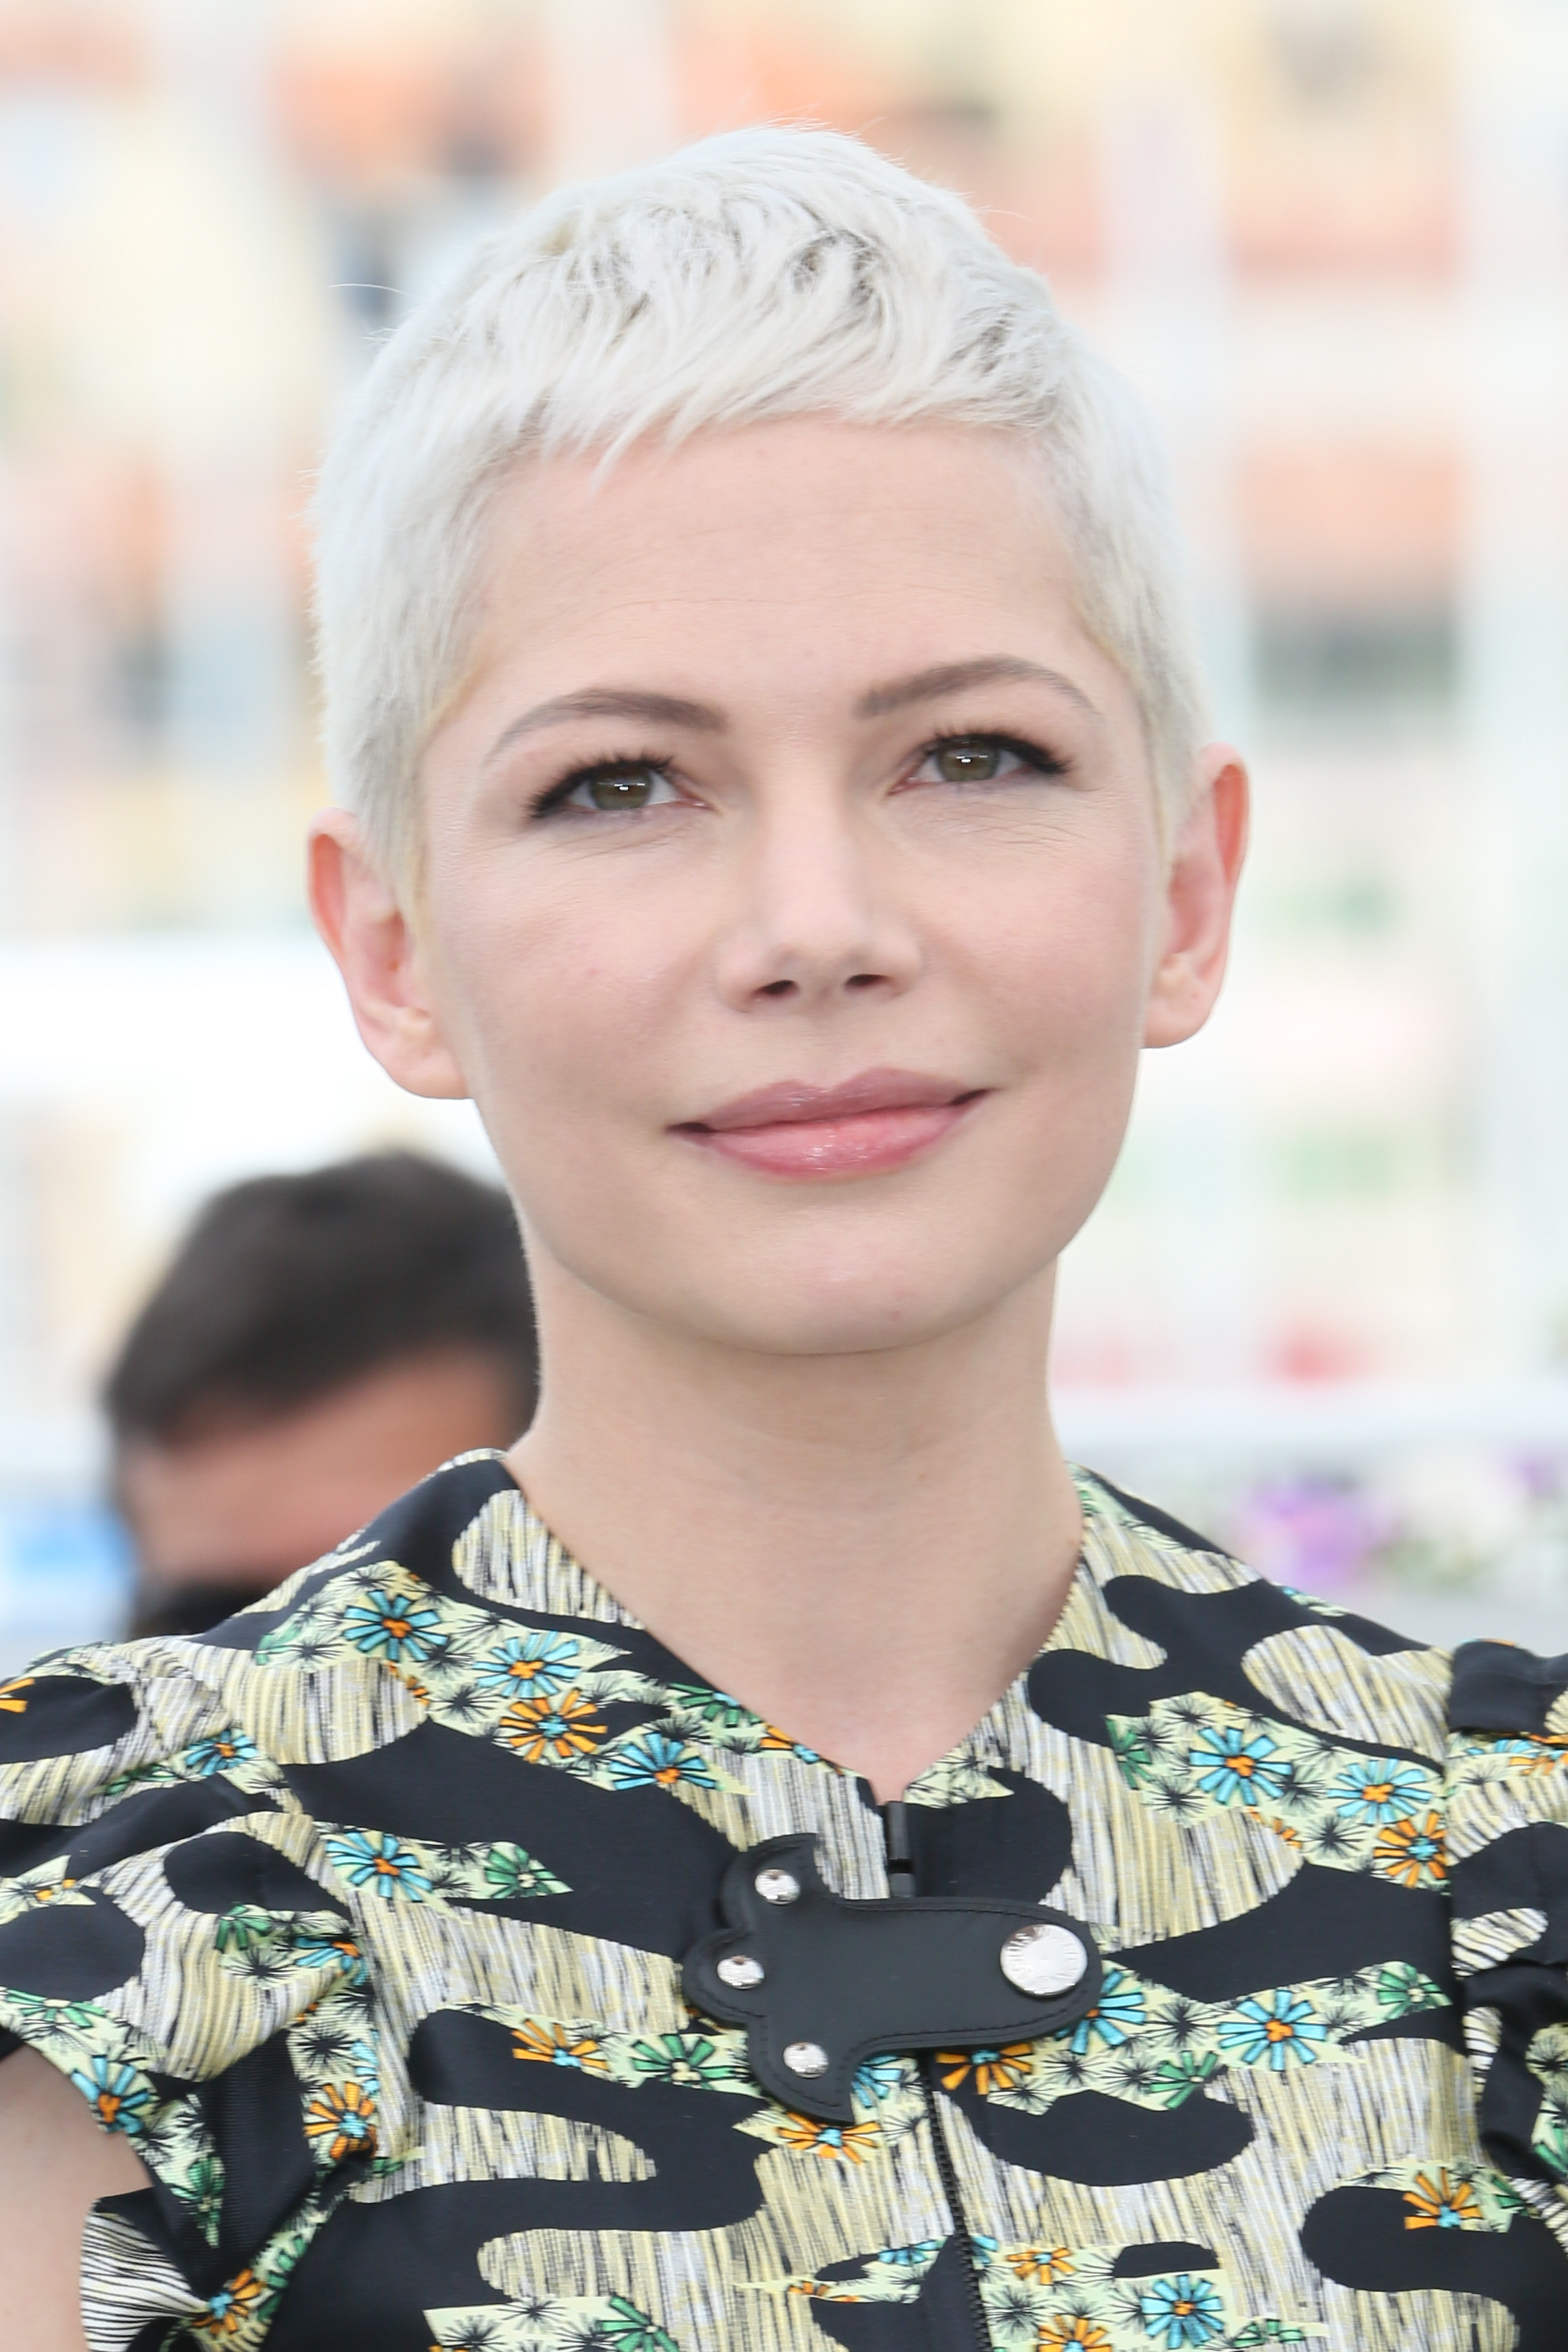 CANNES, FRANCE - MAY 18: Michelle Williams attends the 